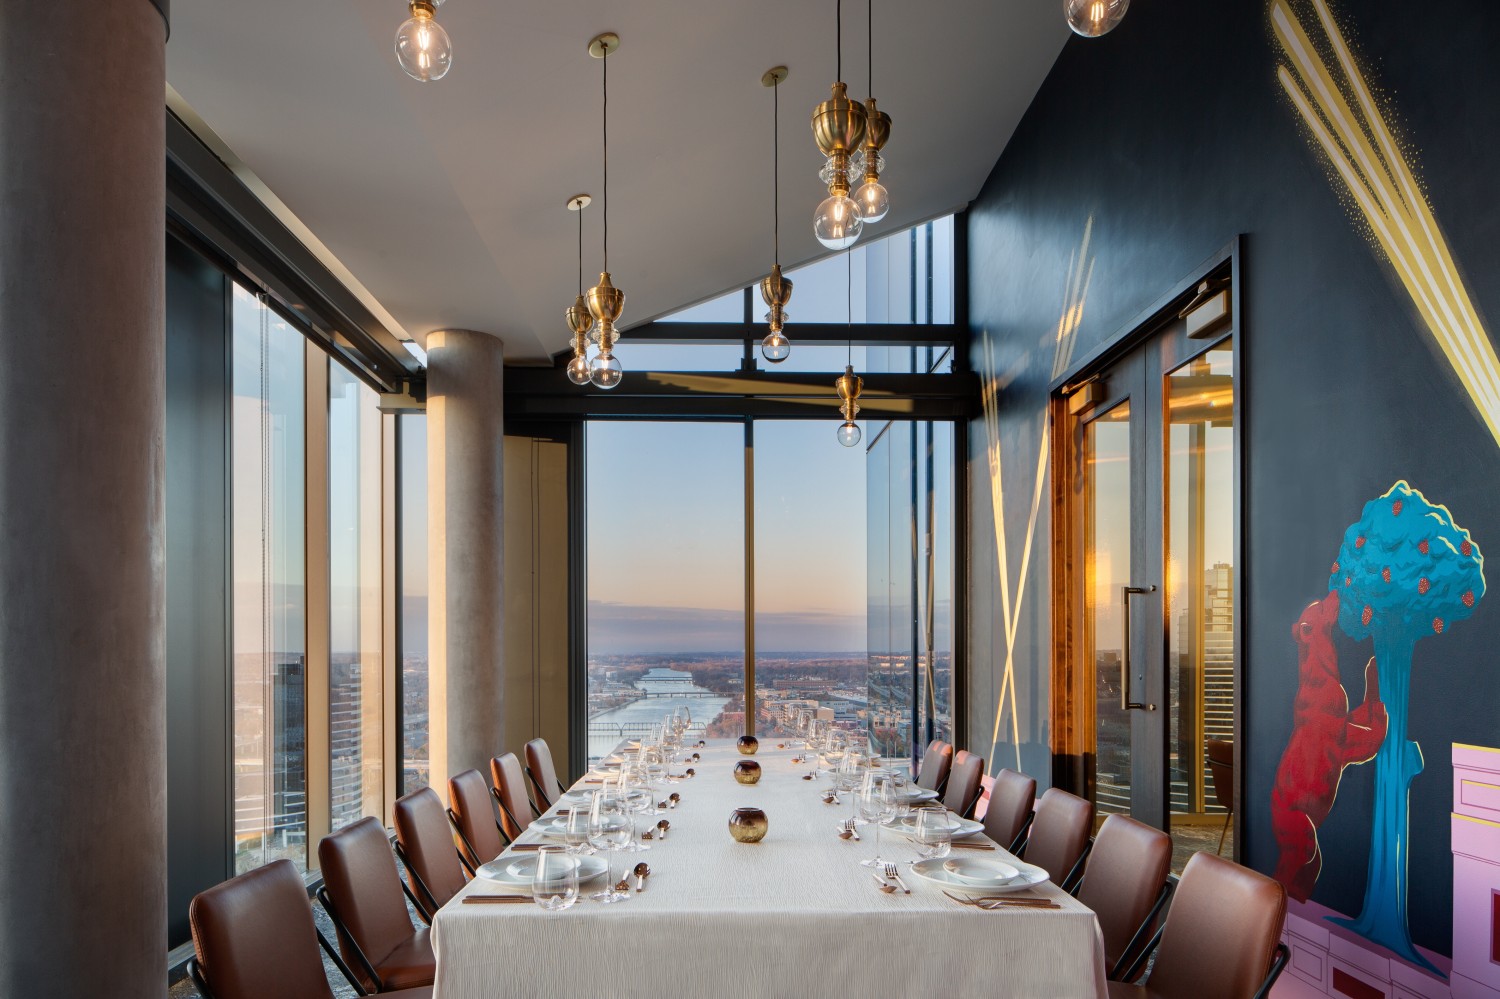 Amway Grand_MDRD_Private Dining Puerta Del Sol_Long Table_Chairs_Spanish Mural_River View_Handing Lights